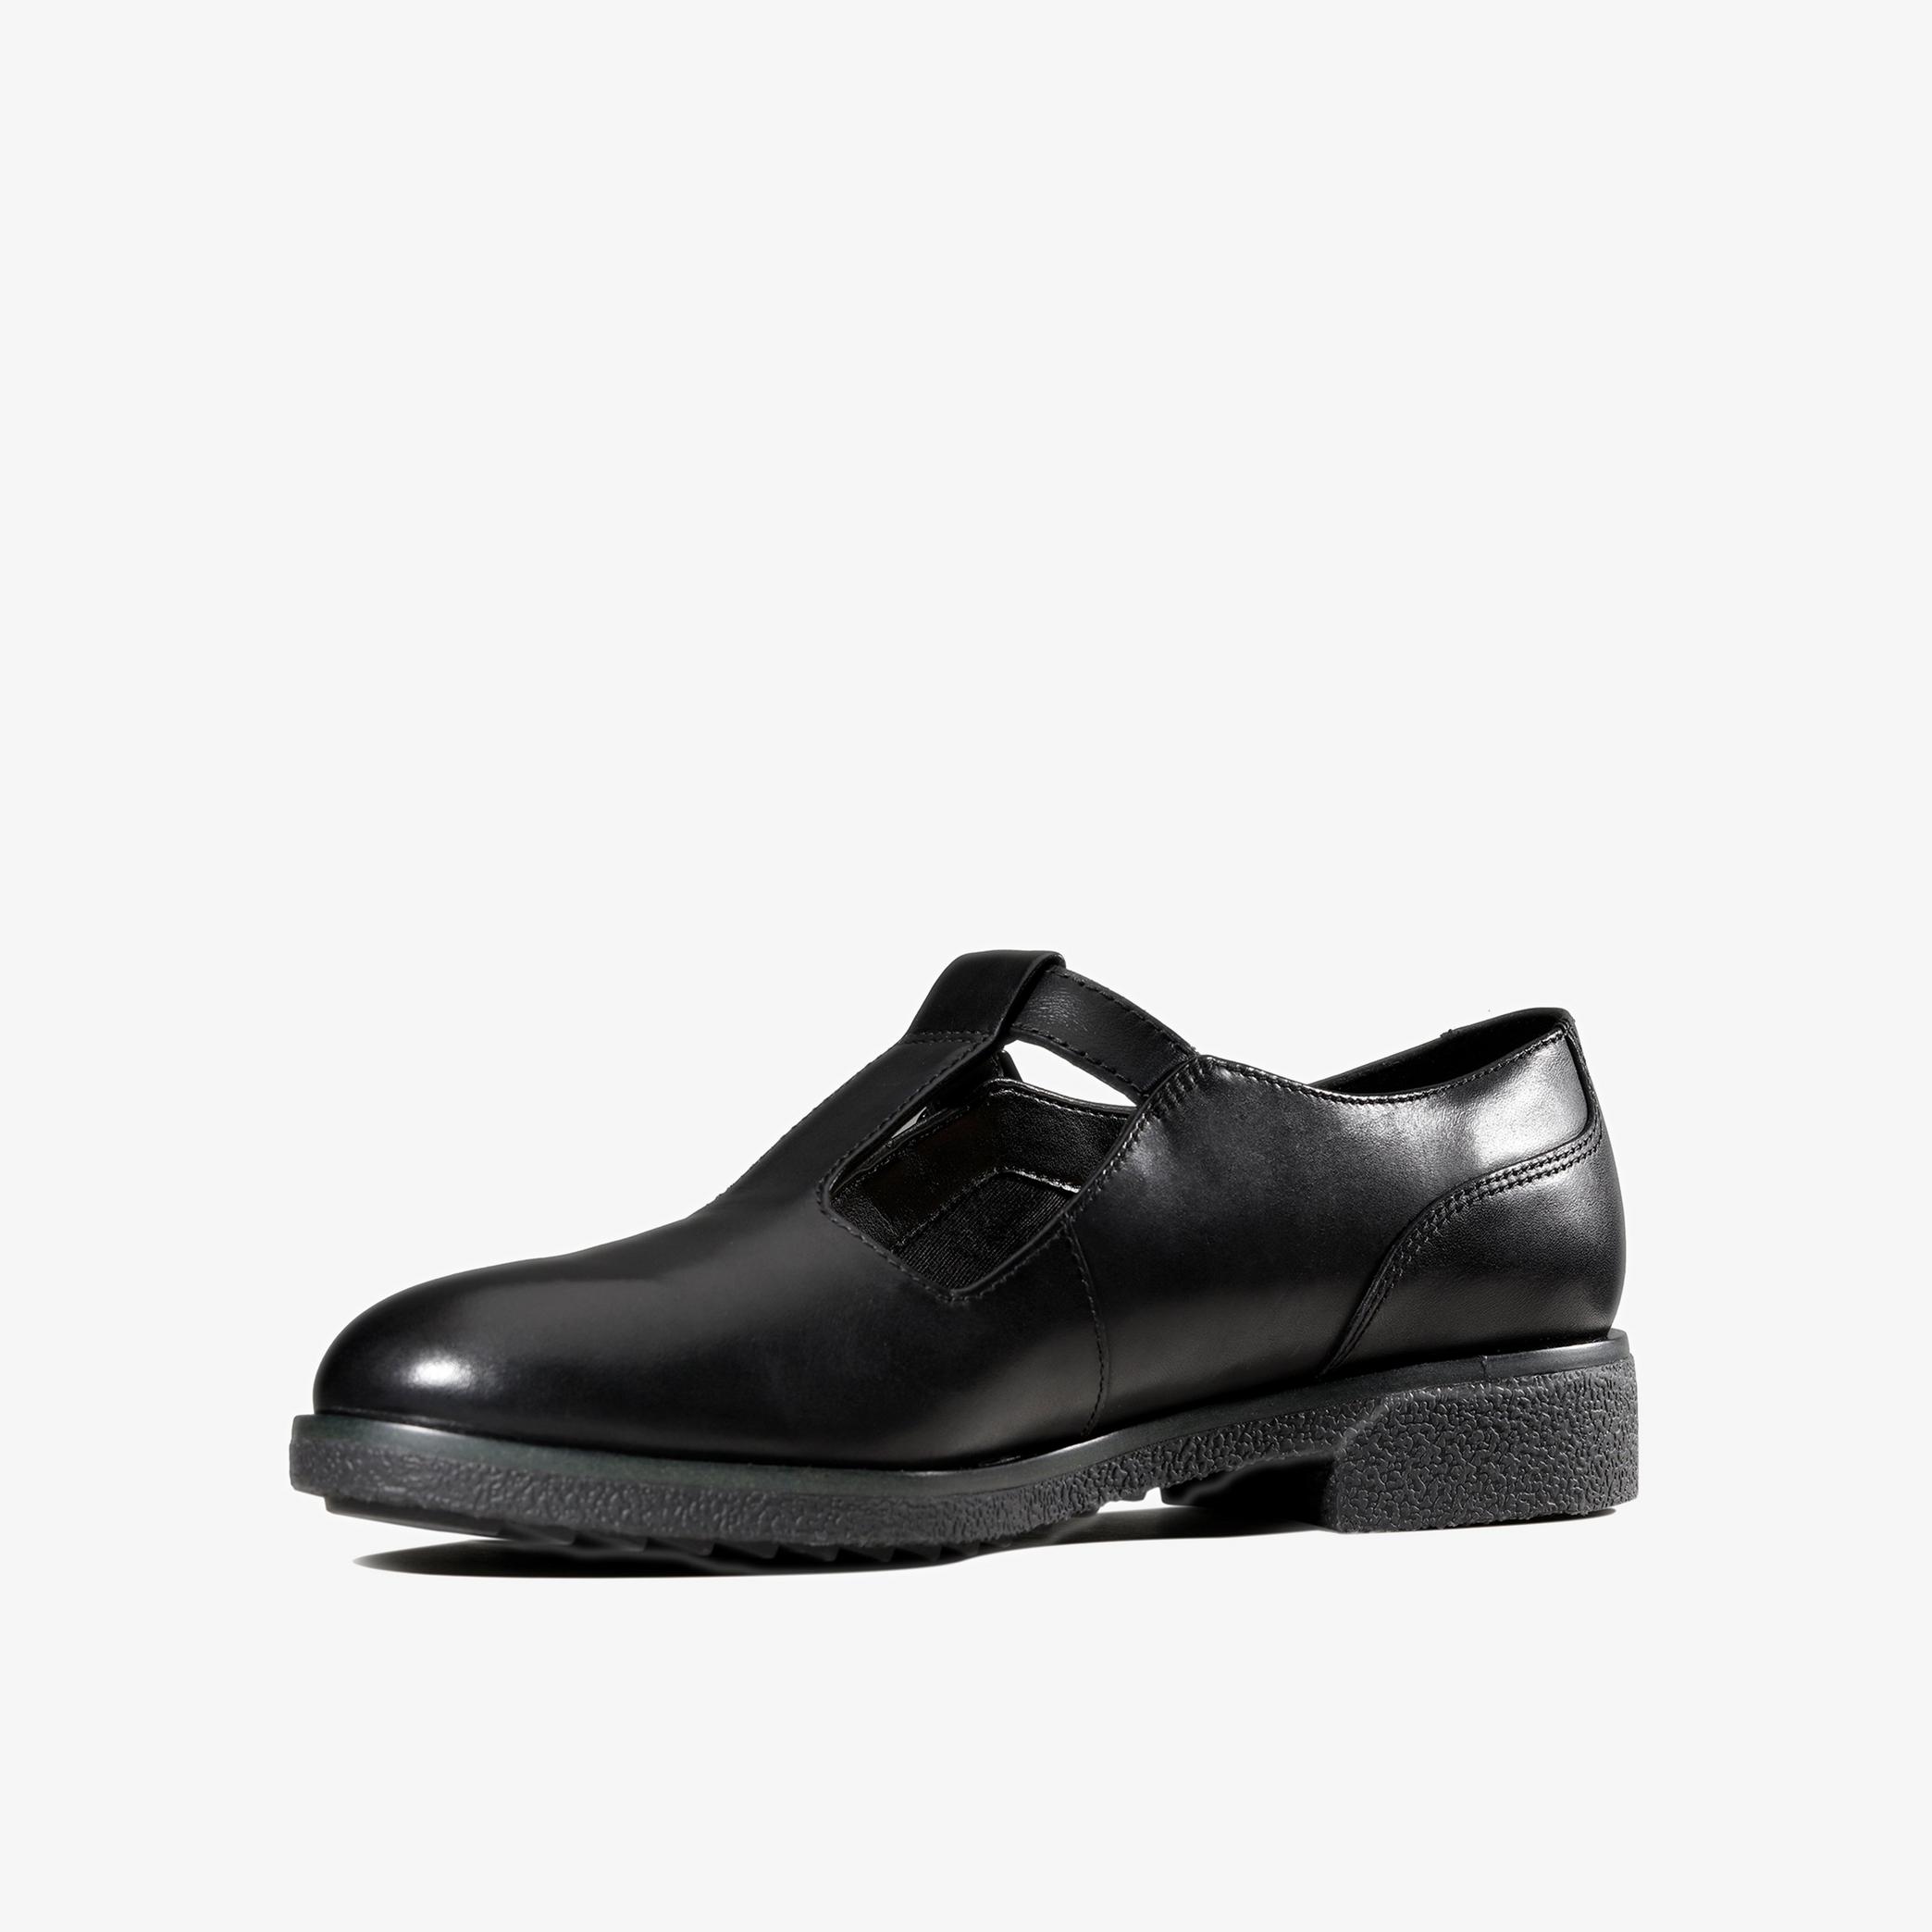 Griffin Town Black Leather T Bar Shoes, view 4 of 6